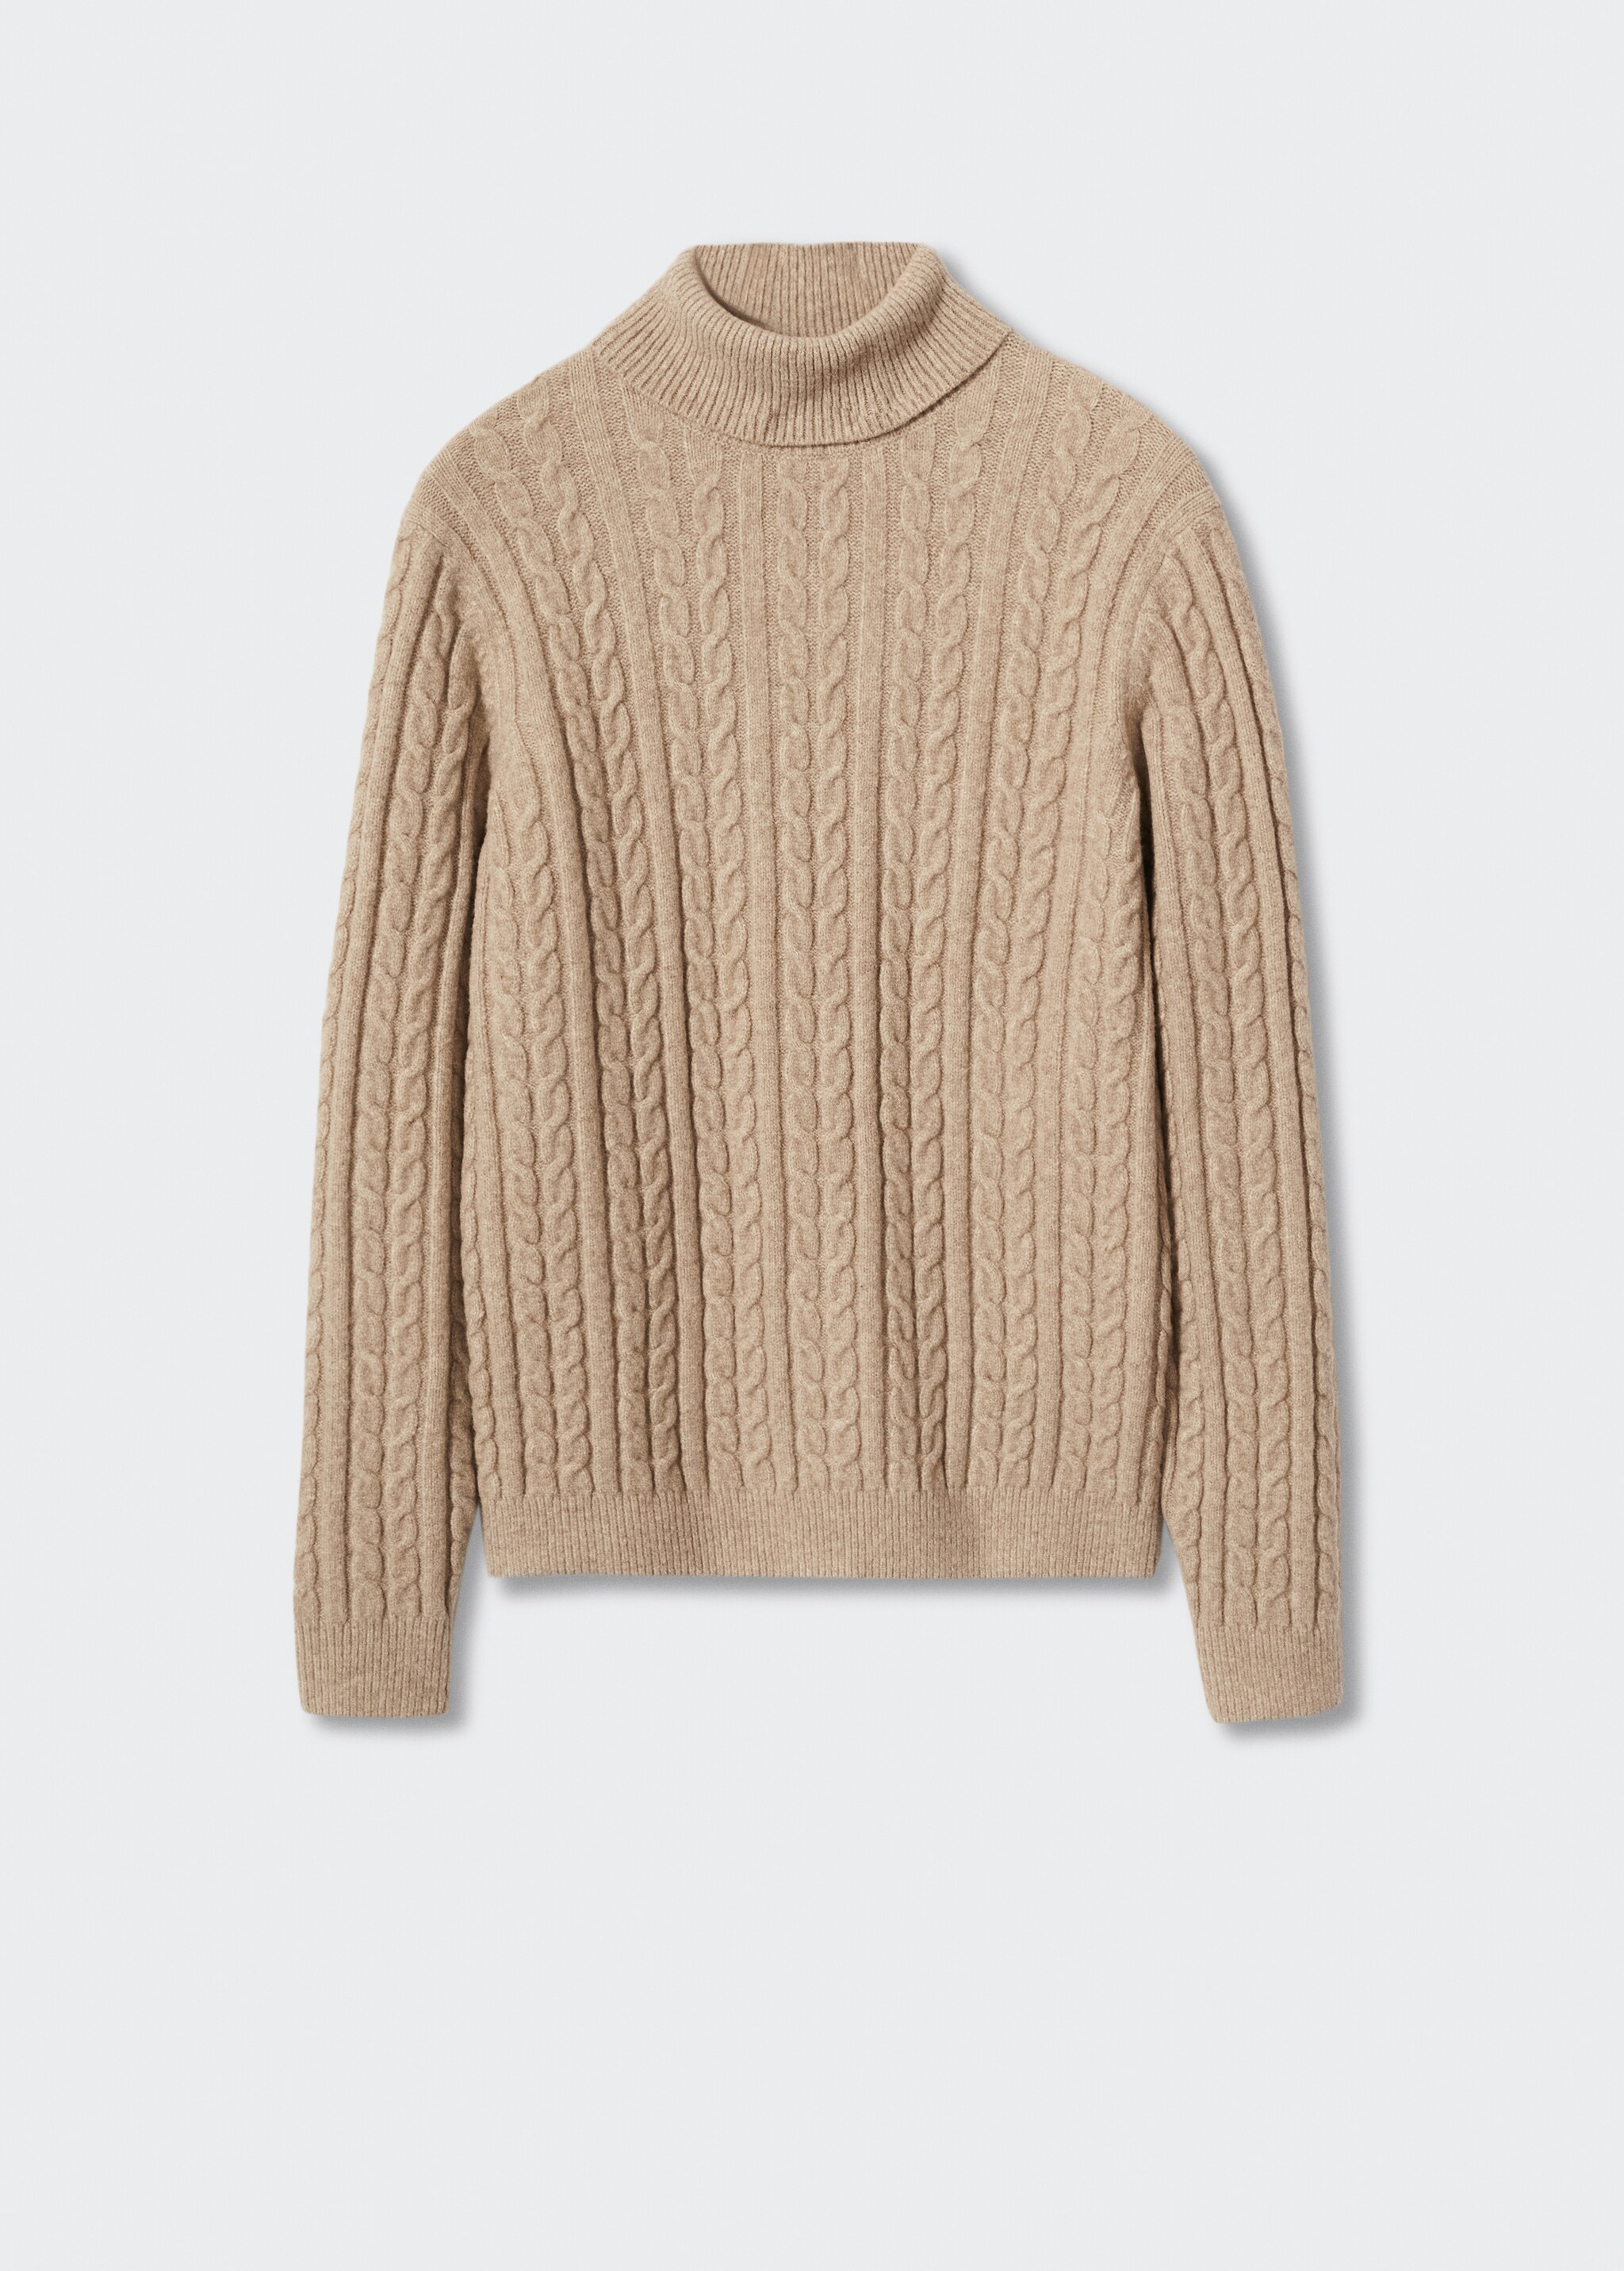 Braided turtleneck sweater - Article without model